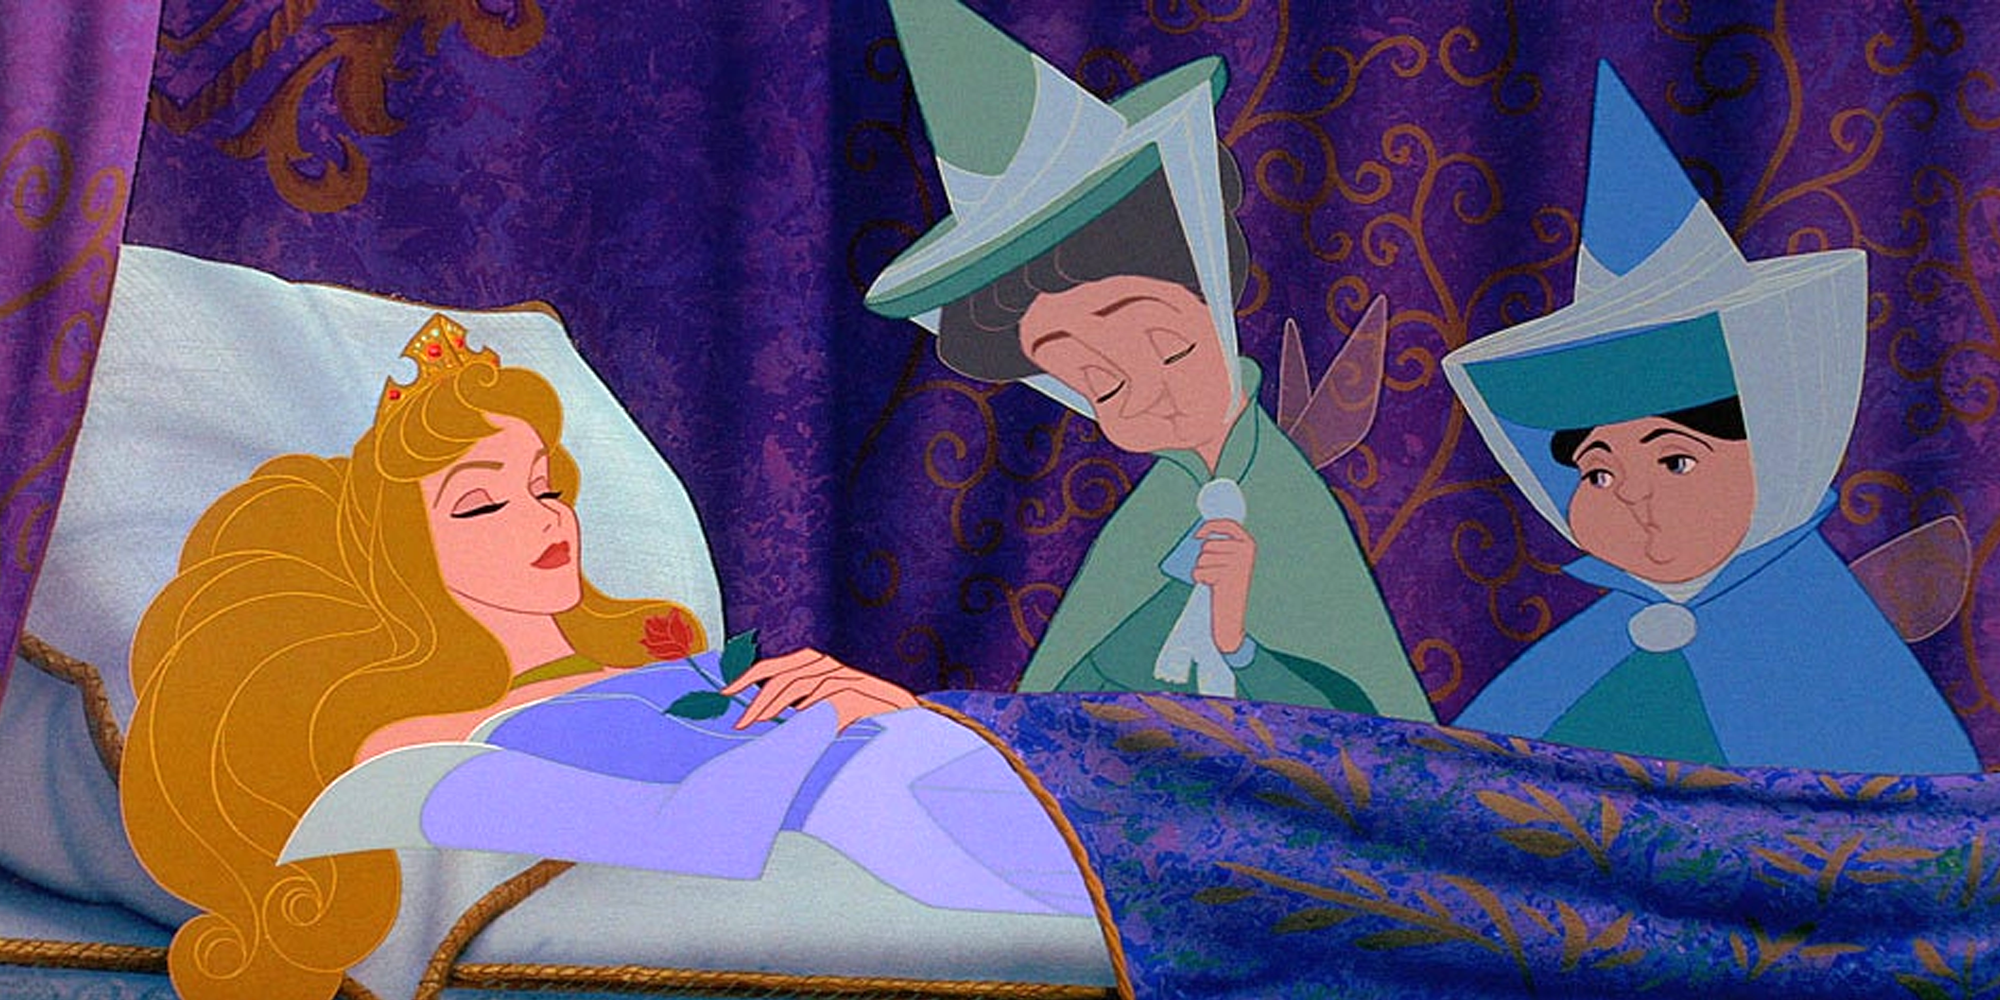 Two fairy godmothers are watching Aurora sleeping in bed in Sleeping Beauty.